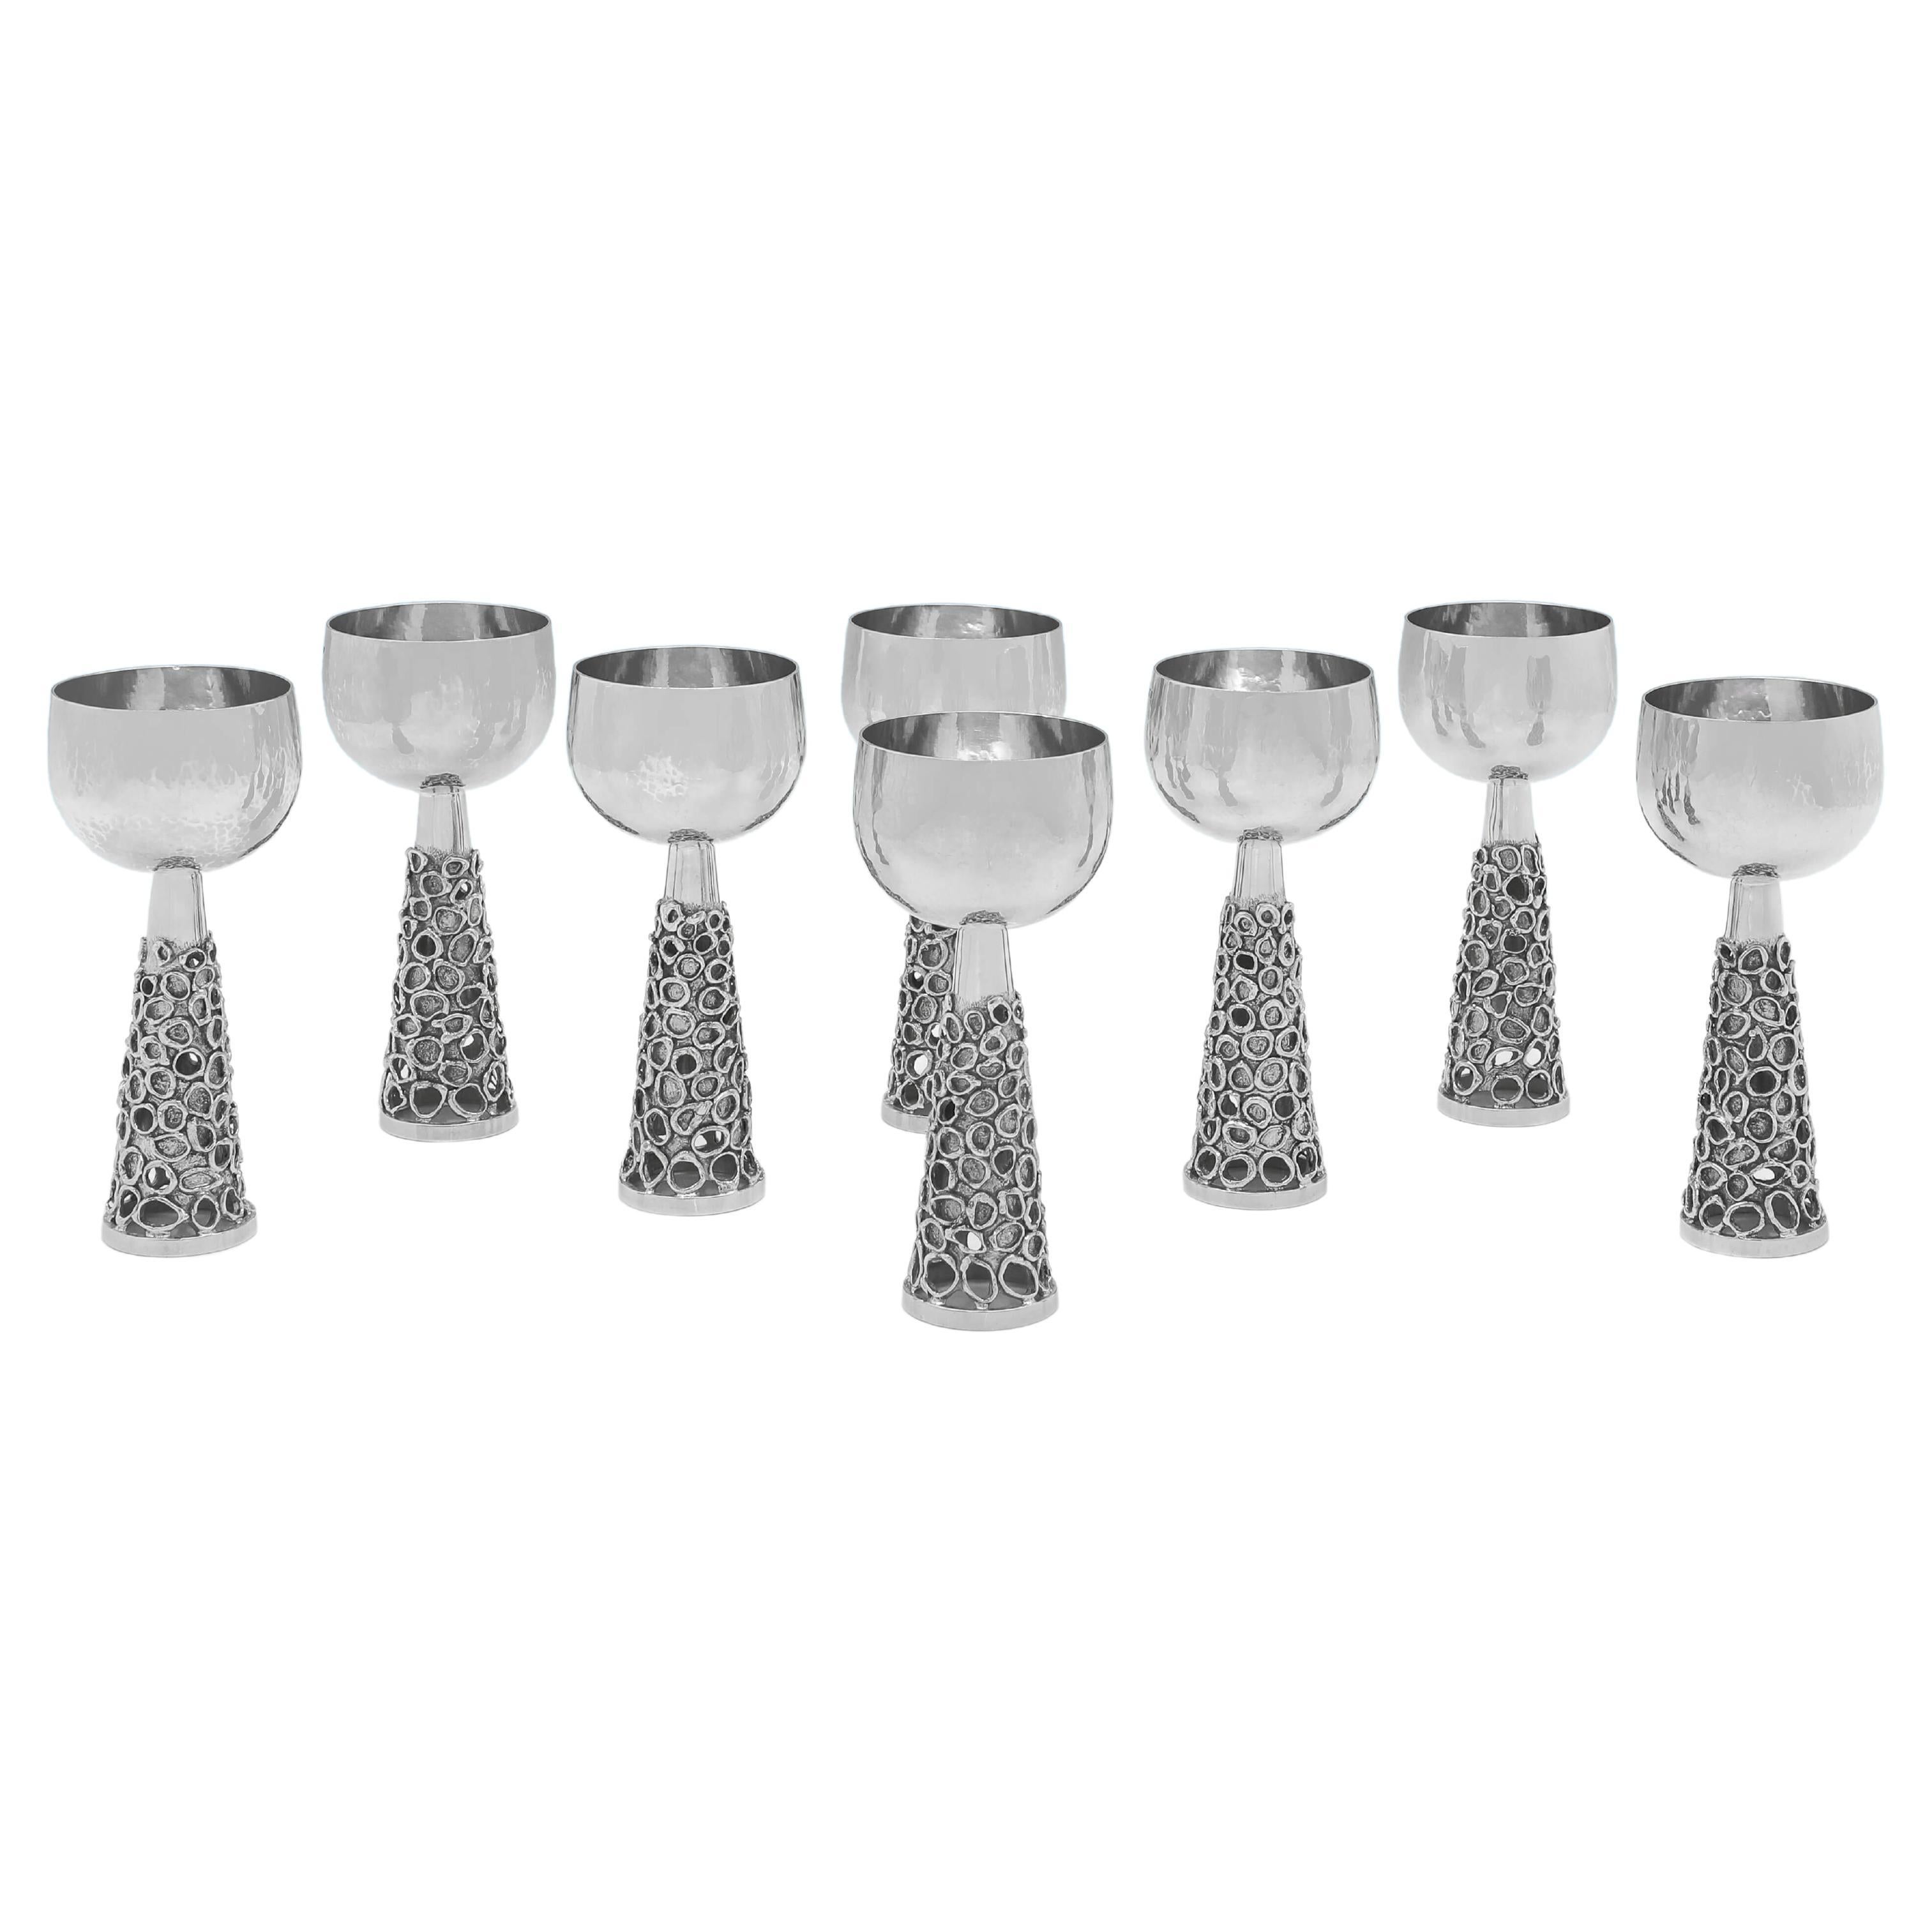 Stylish Mid-Century Sterling Silver Set of 8 Wine Goblets, Graham Watling, 1974 For Sale